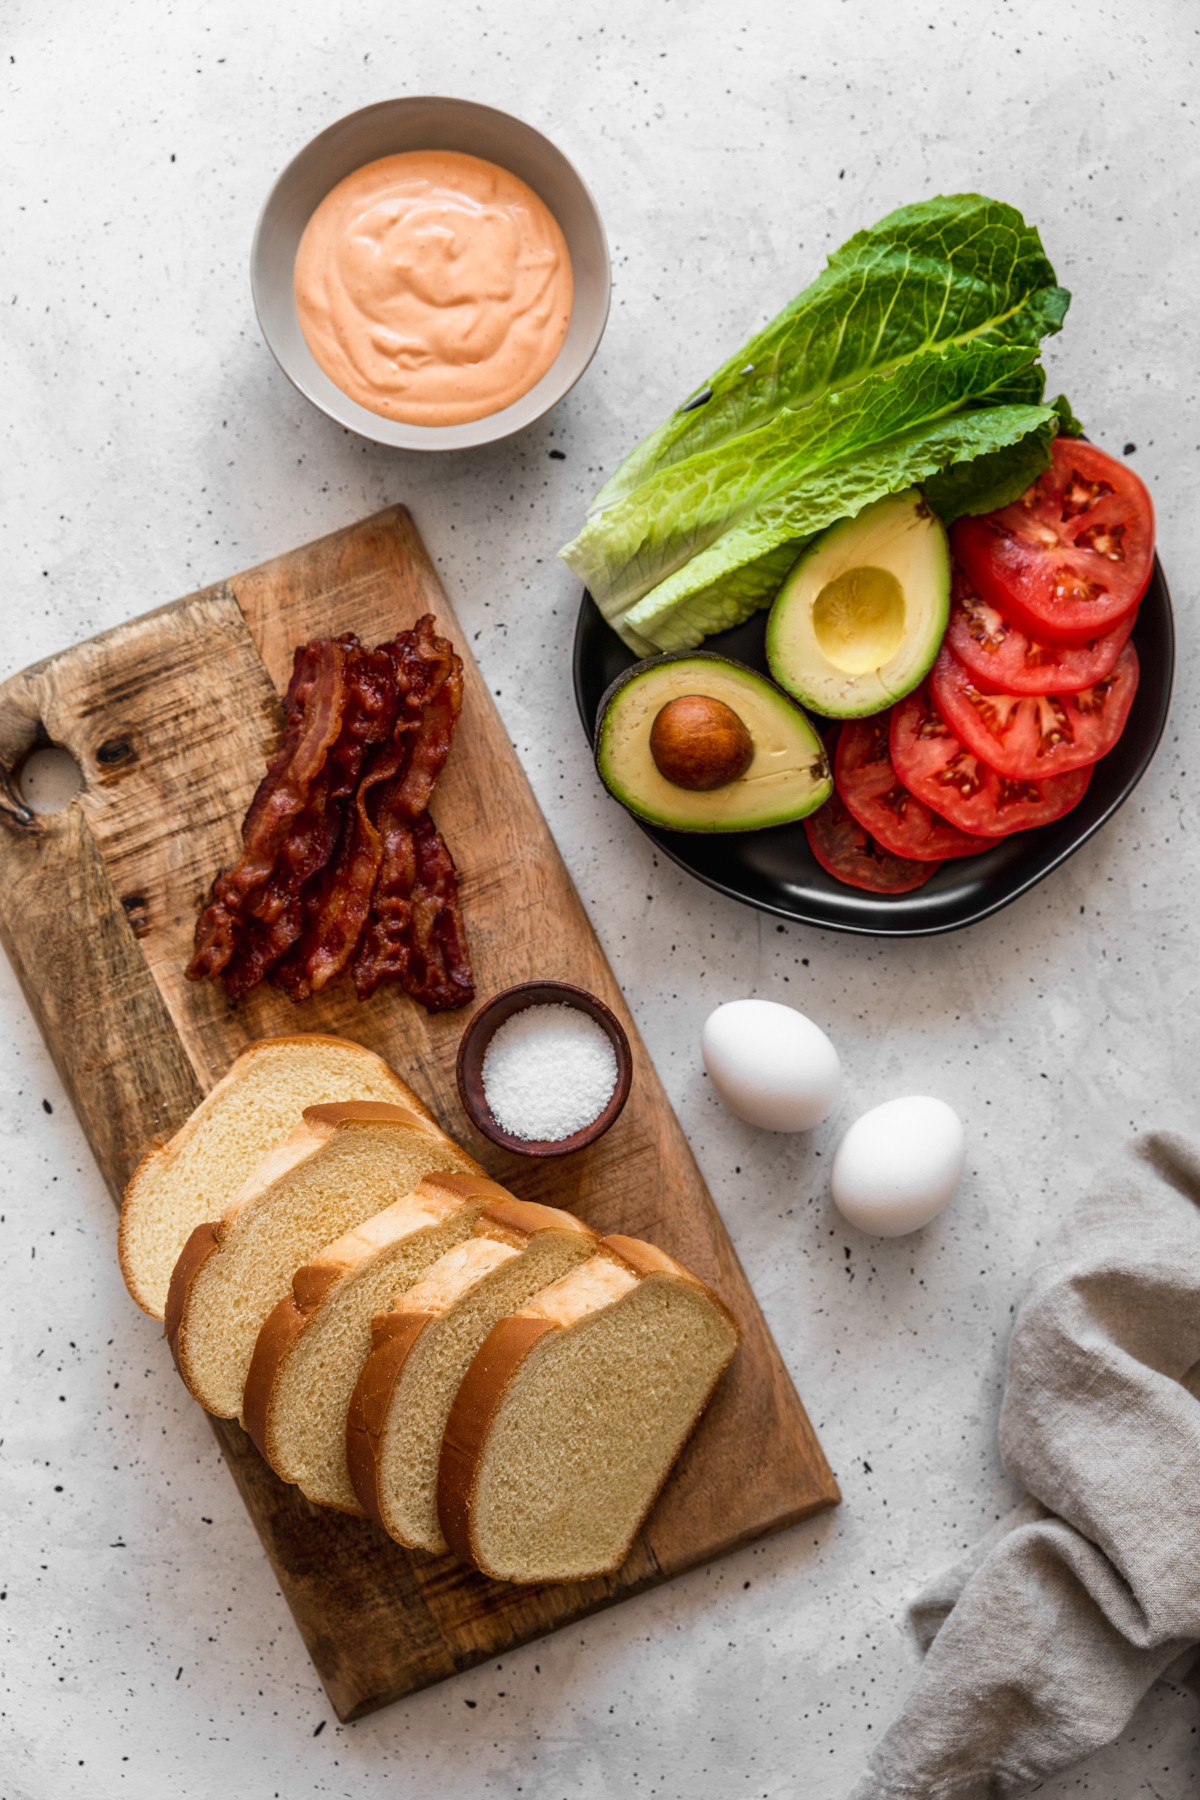 An overhead image of a black plate with lettuce, tomato slices, and a halved avocado on a grey table next to eggs, a wood board topped with bacon and bread, and a bowl of spicy mayo.